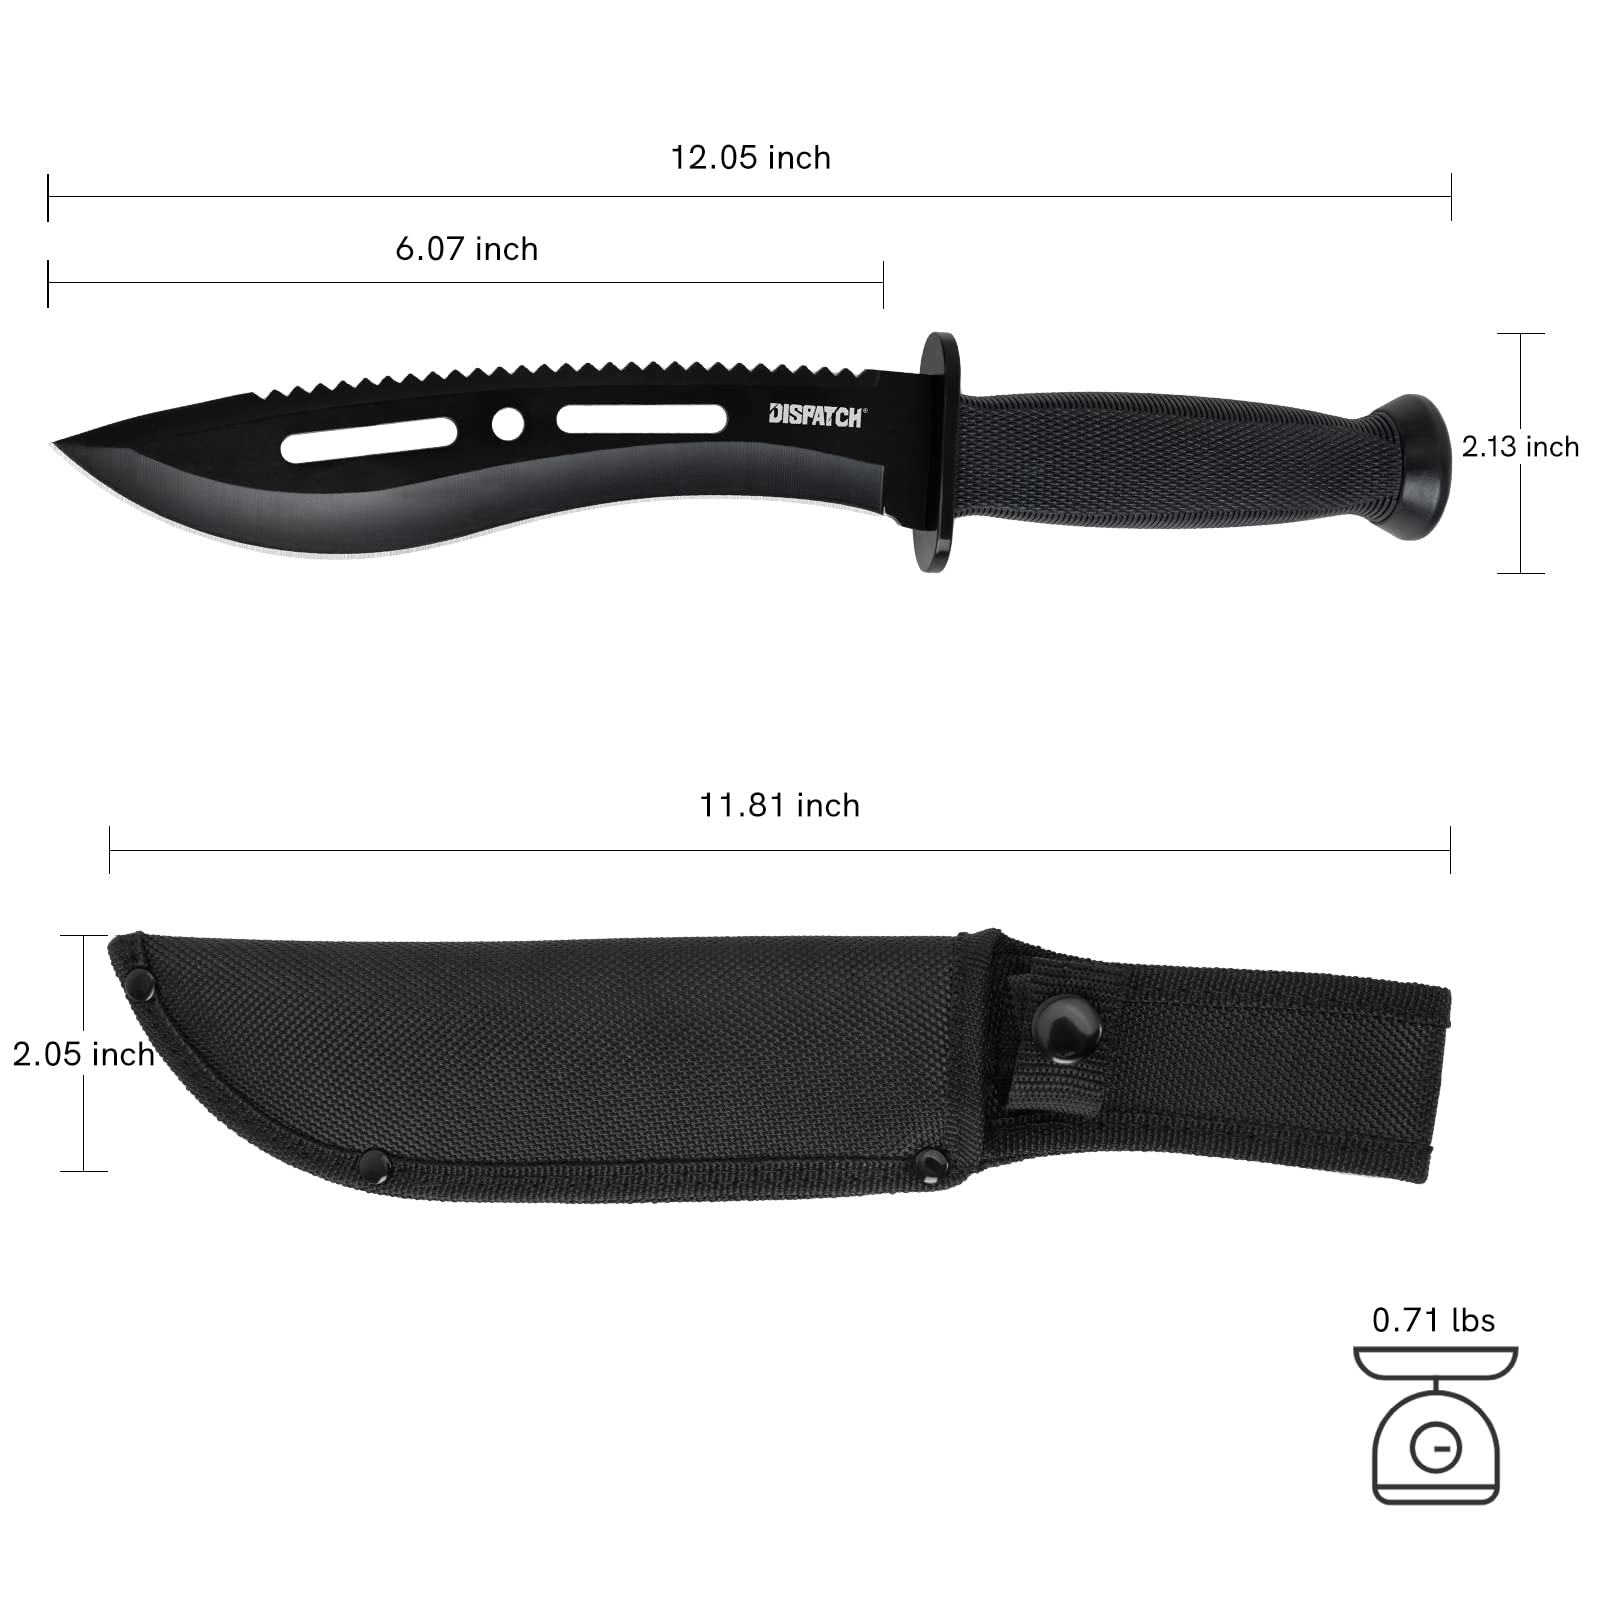 Dispatch Tactical Kukri Machete Survival Hunting Knife with Kukri Recurved Blade, Steel Head Steel Tail of Fixed Blade Knife with Sheath for Outdoor Survival, Camping, and Bushcraft